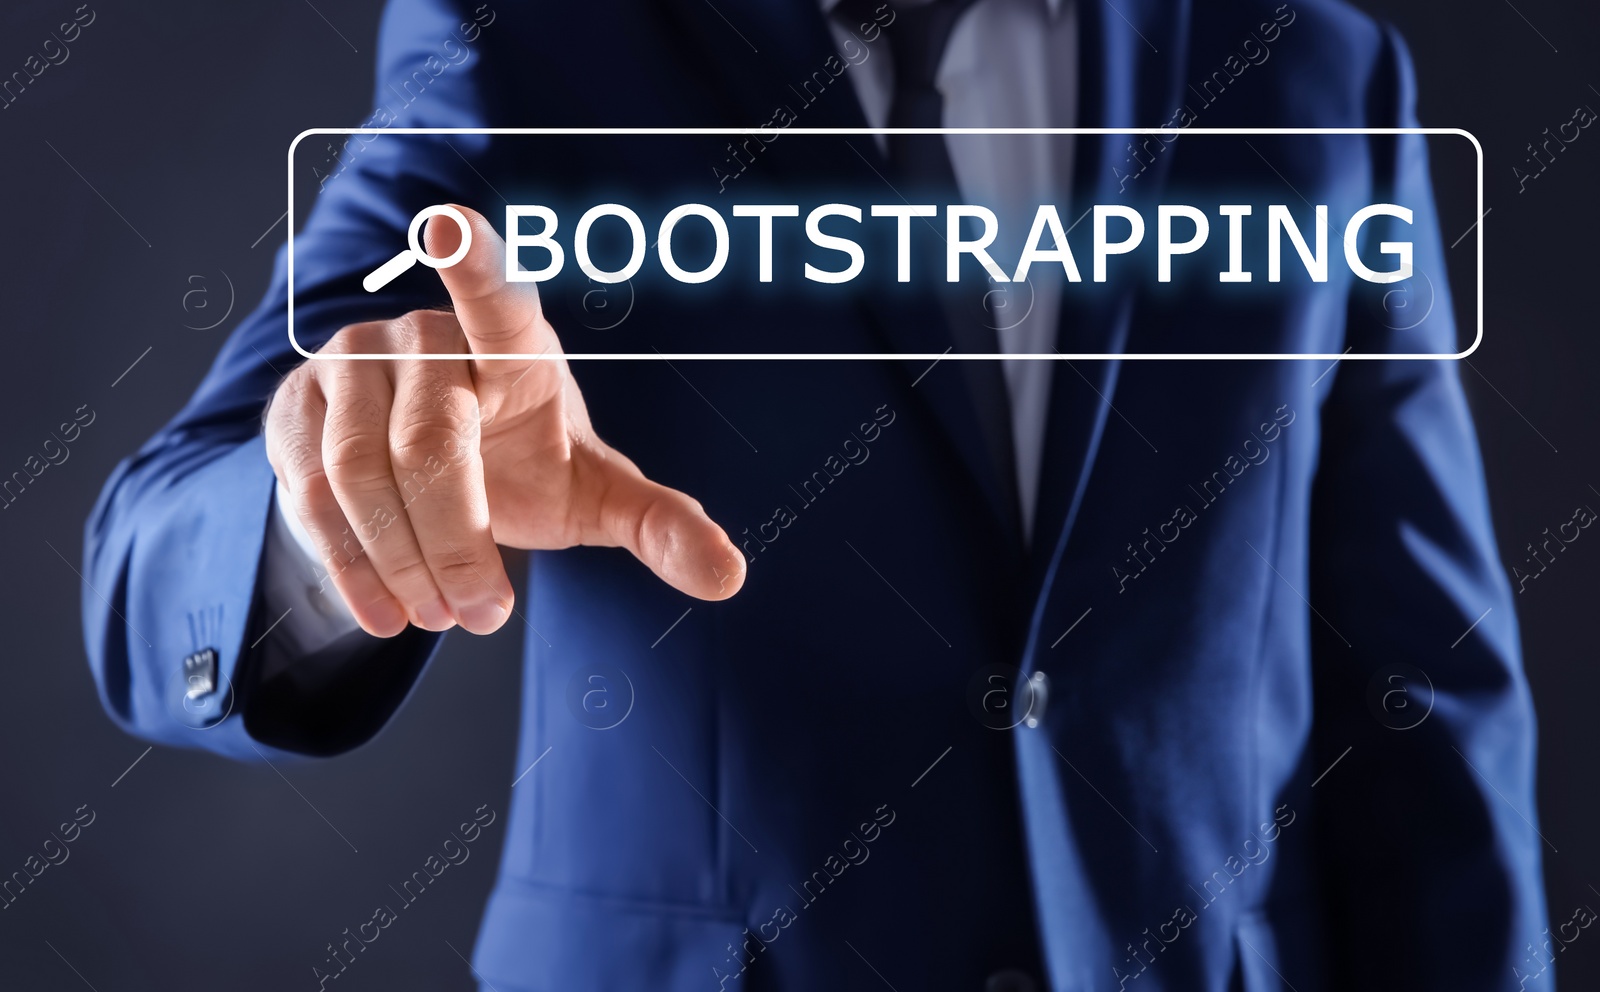 Image of Businessman touching virtual screen with word BOOTSTRAPPING in search bar against dark background, focus on hand